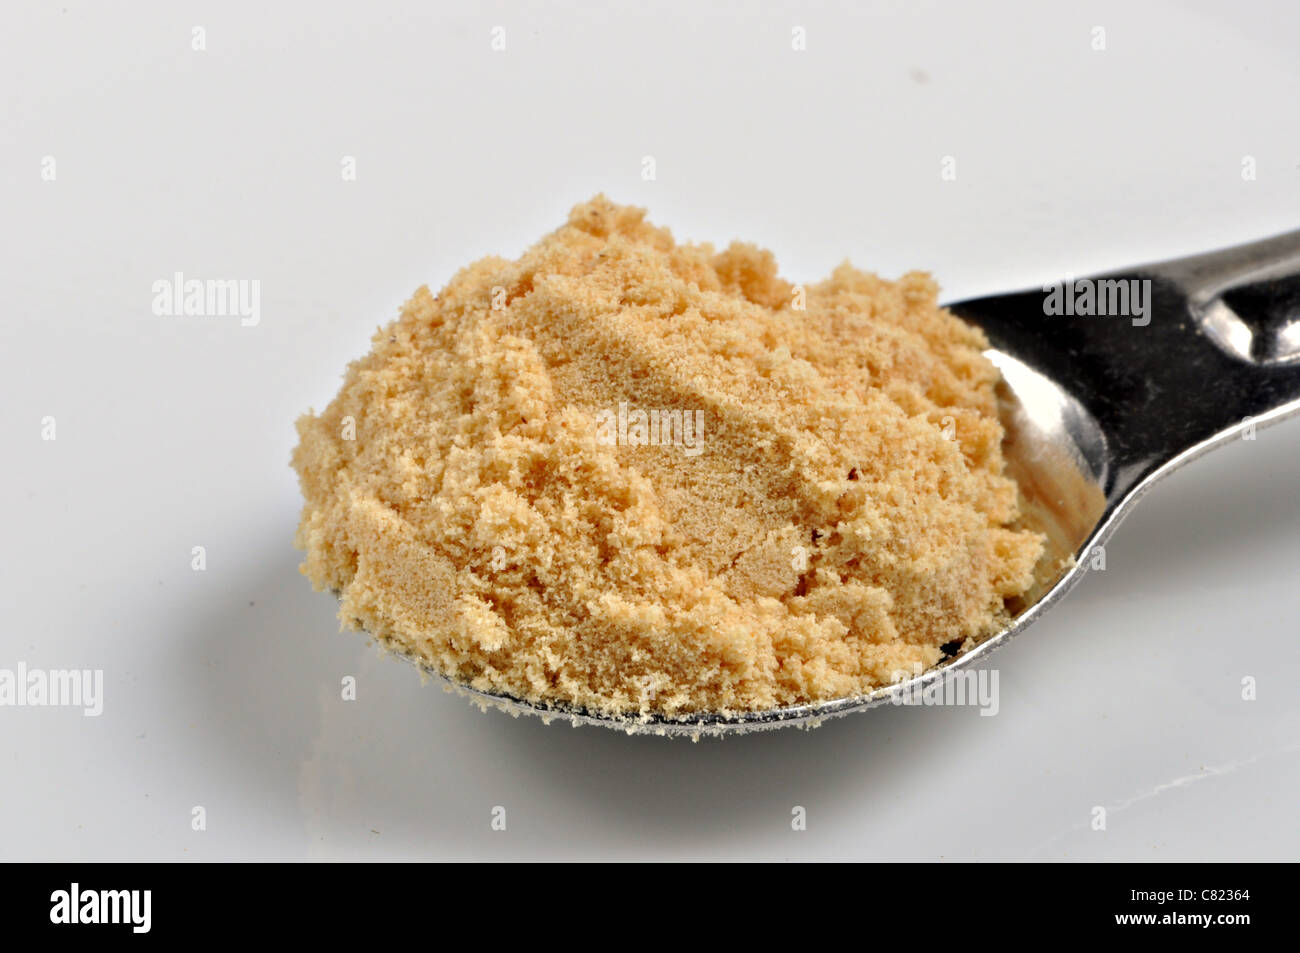 A spoonful of ground double superfine mustard sits on a white background. Stock Photo